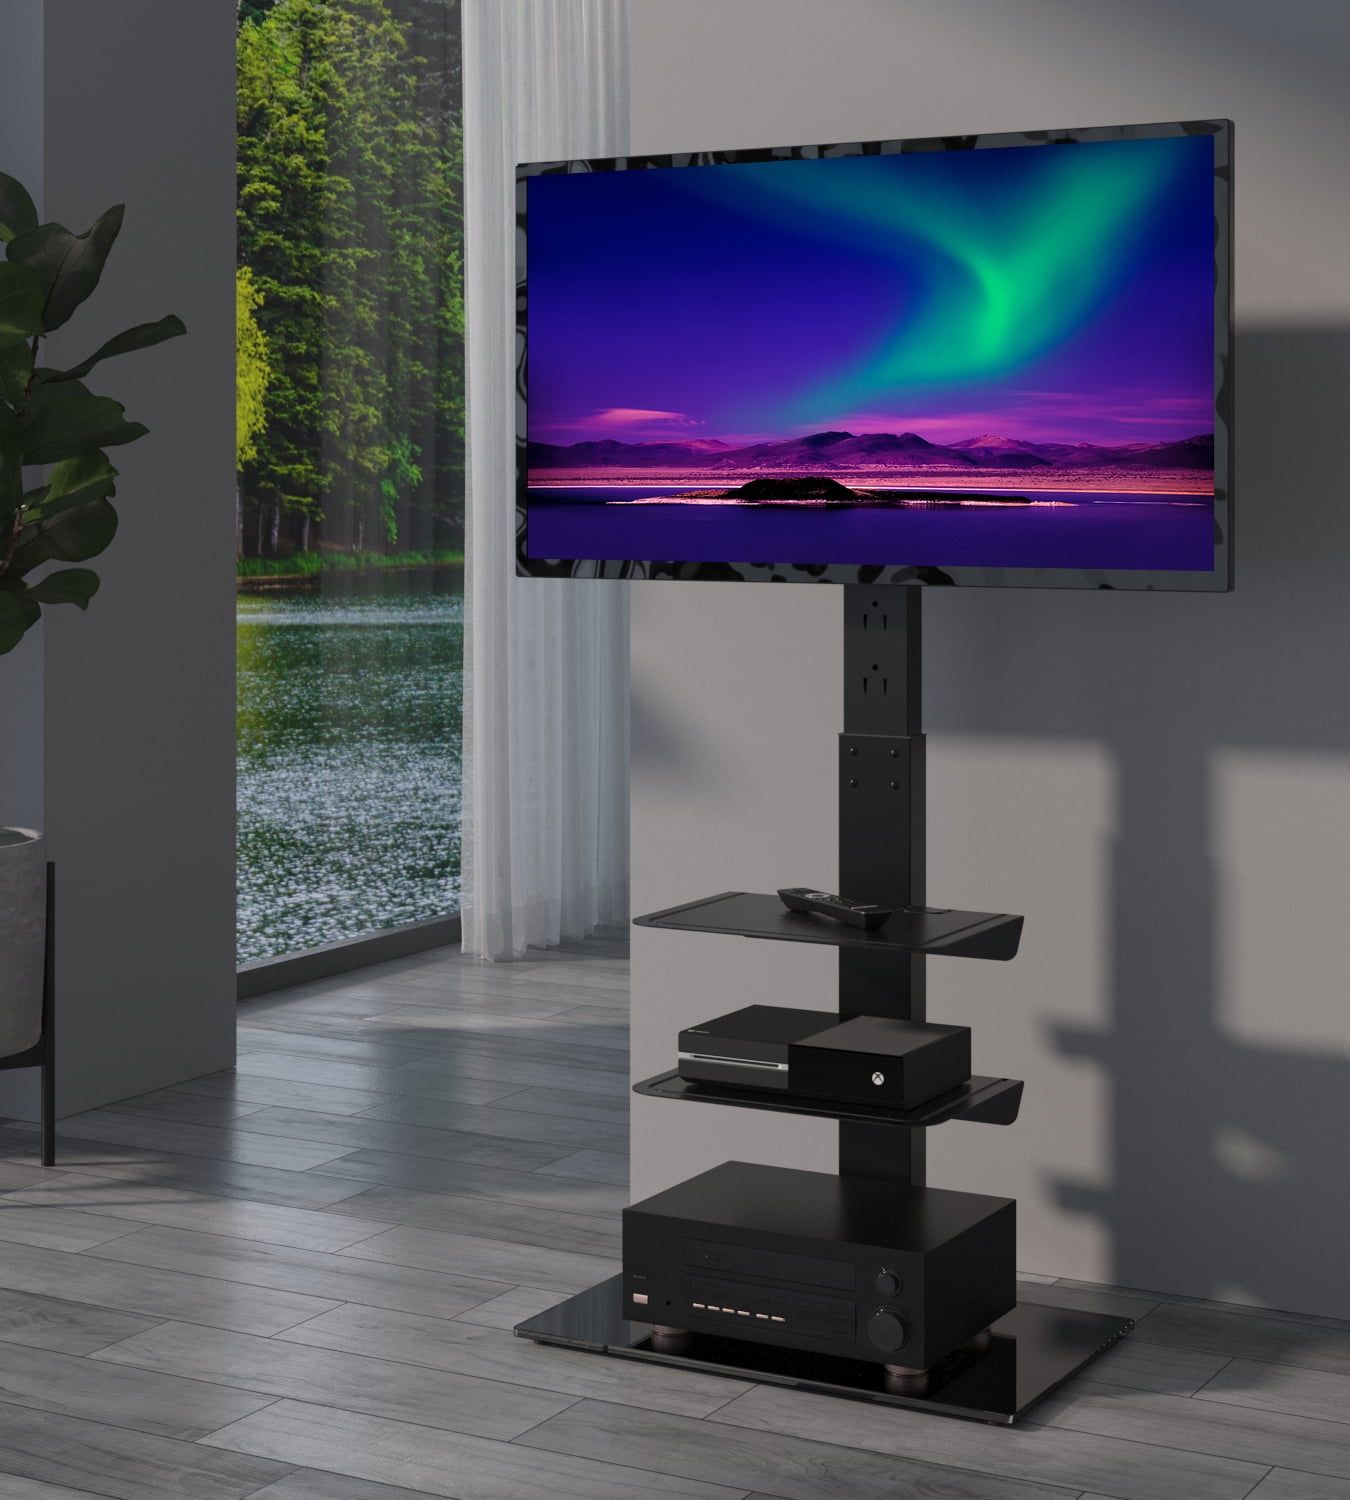 Universal Swivel Floor Tv Stand With Mount Height Adjustable For Most Throughout Universal Floor Tv Stands (Gallery 3 of 20)